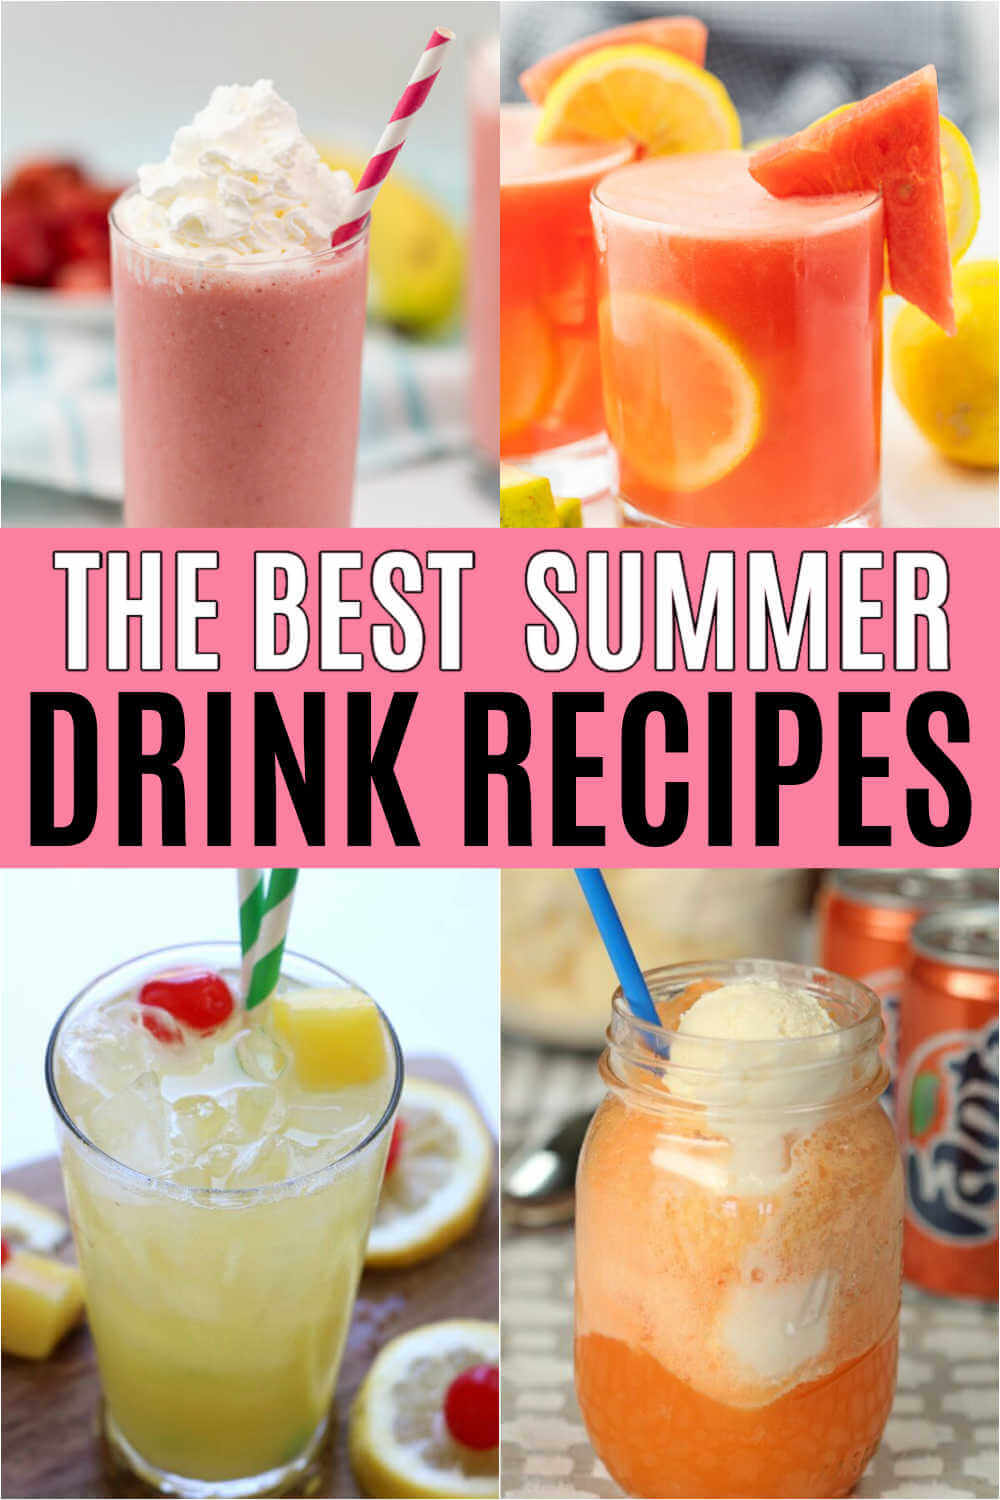 Photos of 4 summer drinks with the words the best summer drink recipes over the top of the photo. 